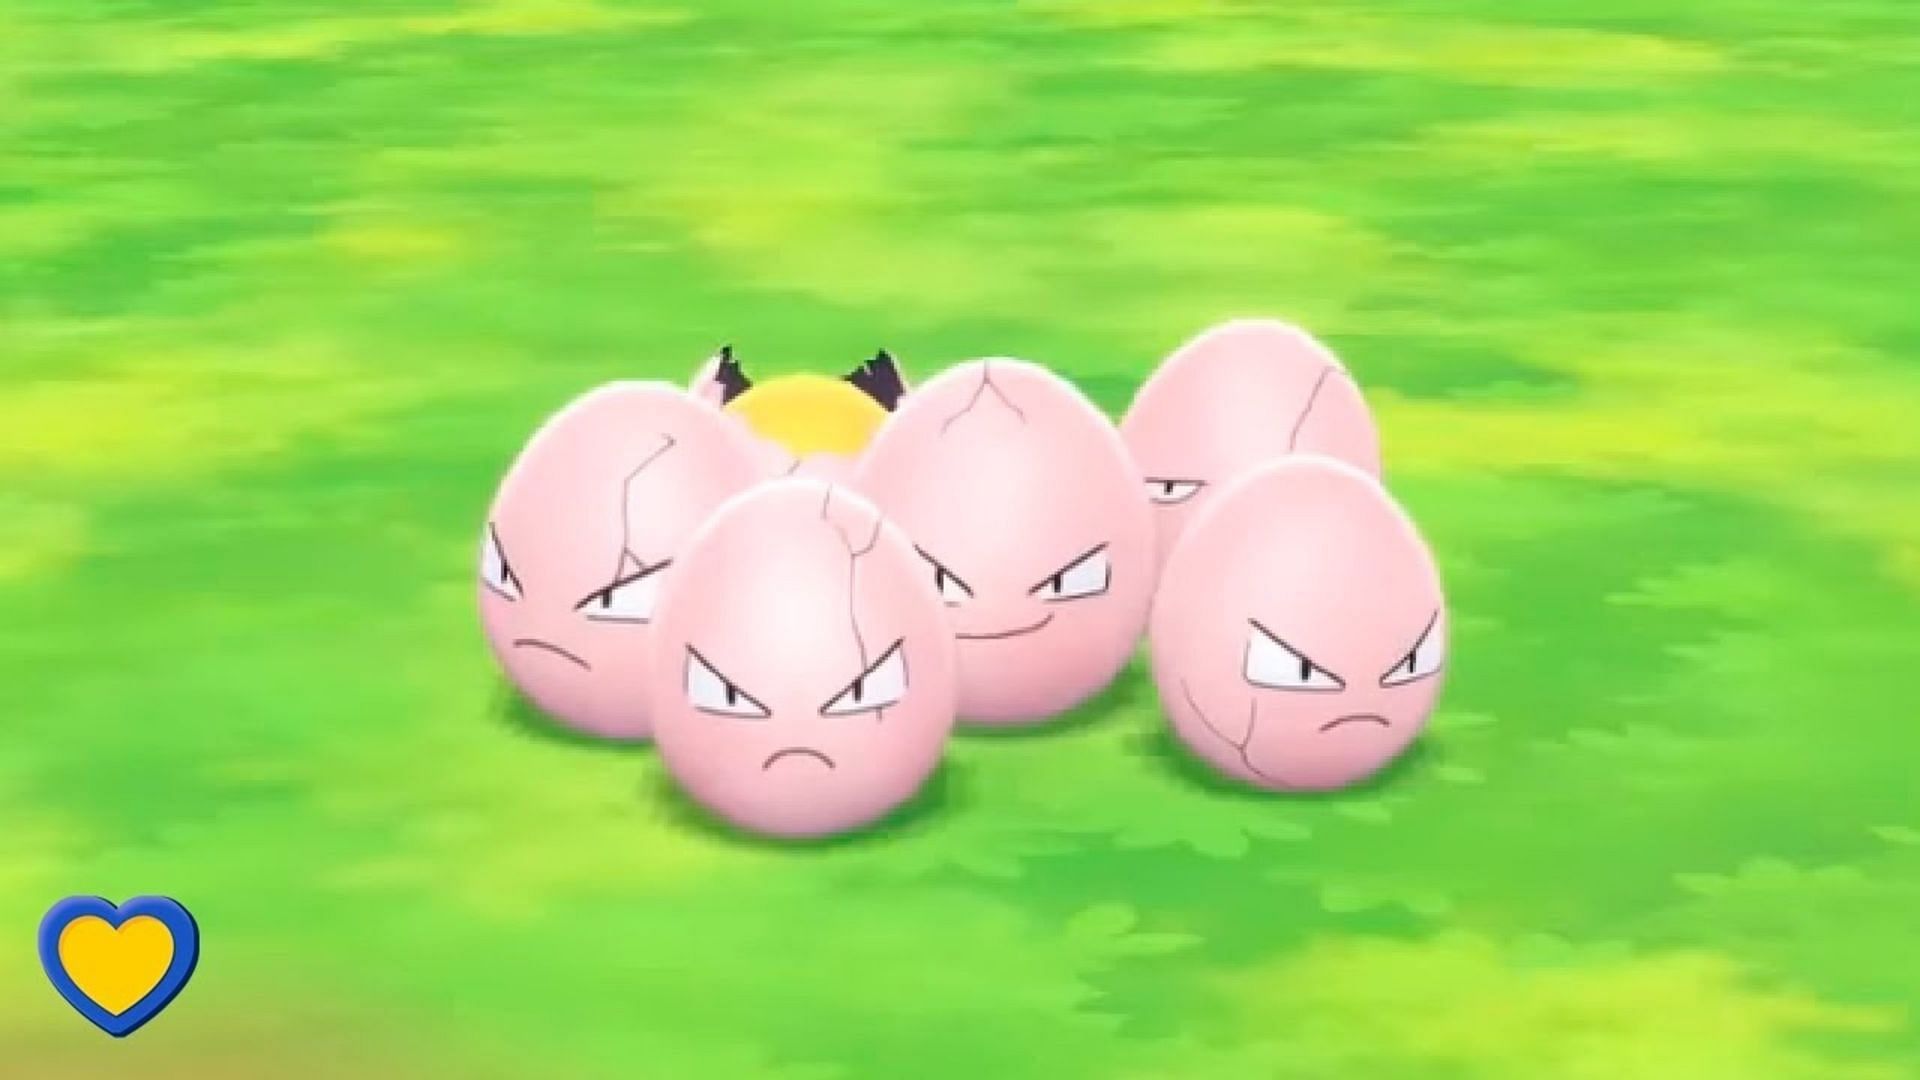 Arlo will be leading with Exeggcute in July (Image via Nirth/YouTube)